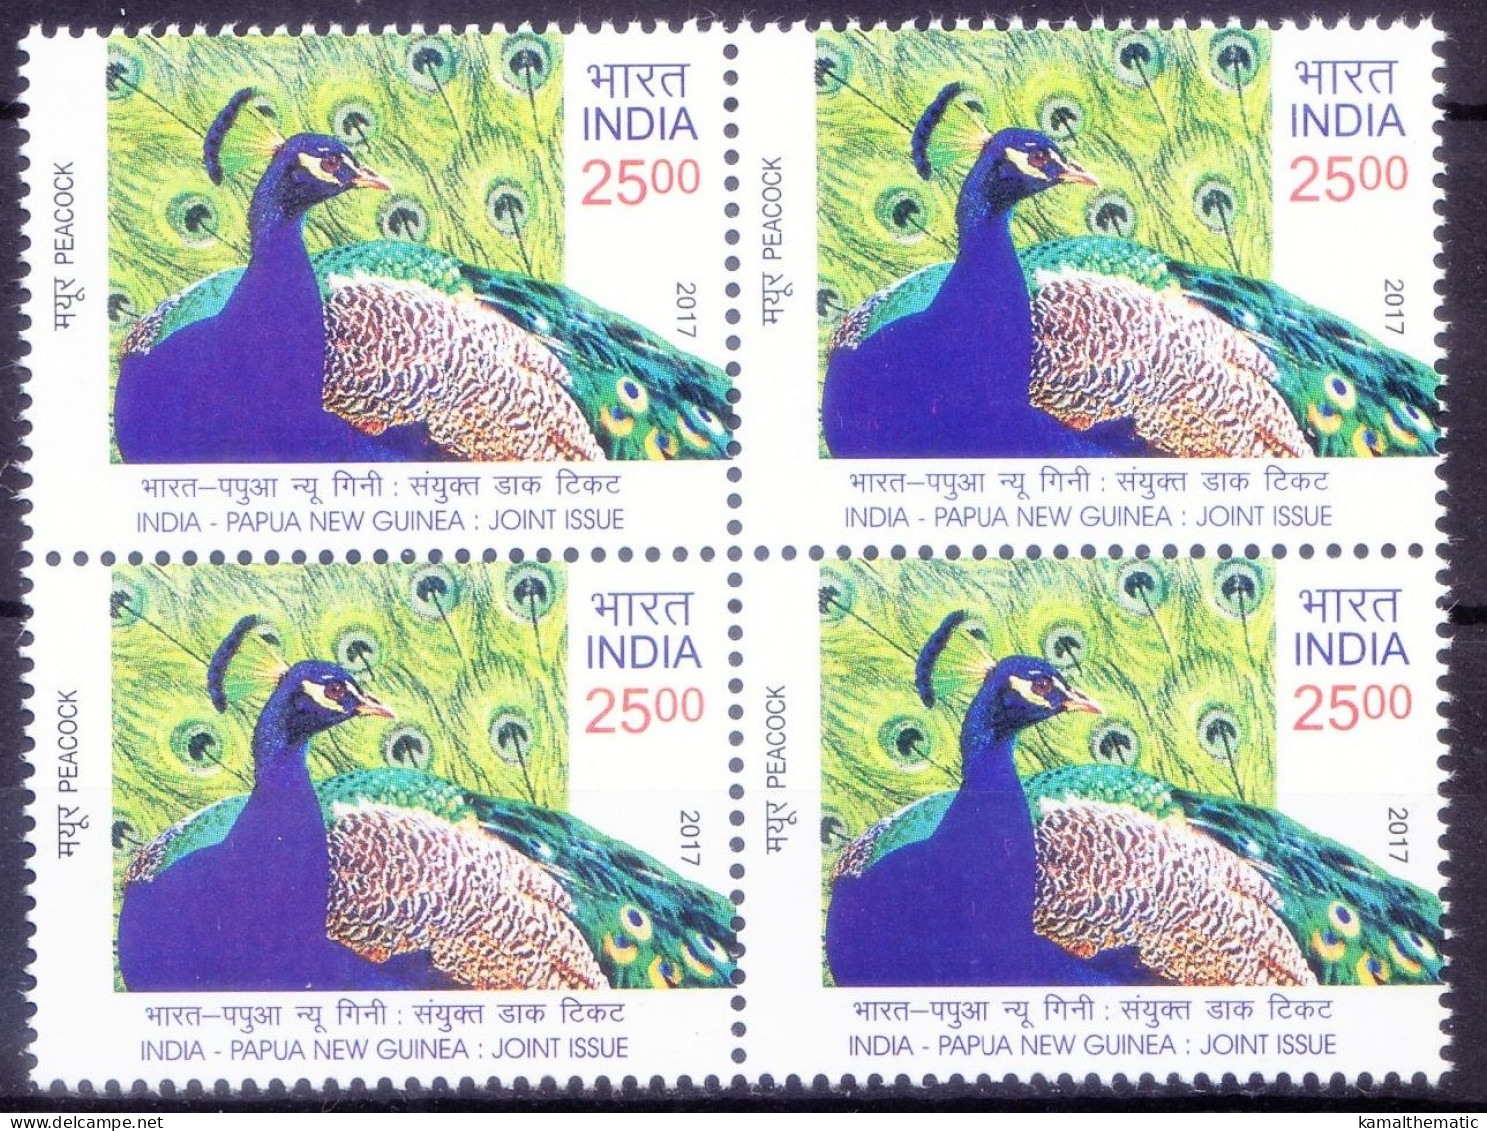 India 2017 MNH Blk, Papua New Guinea Jt Issue, Peacock, Birds - Peacocks